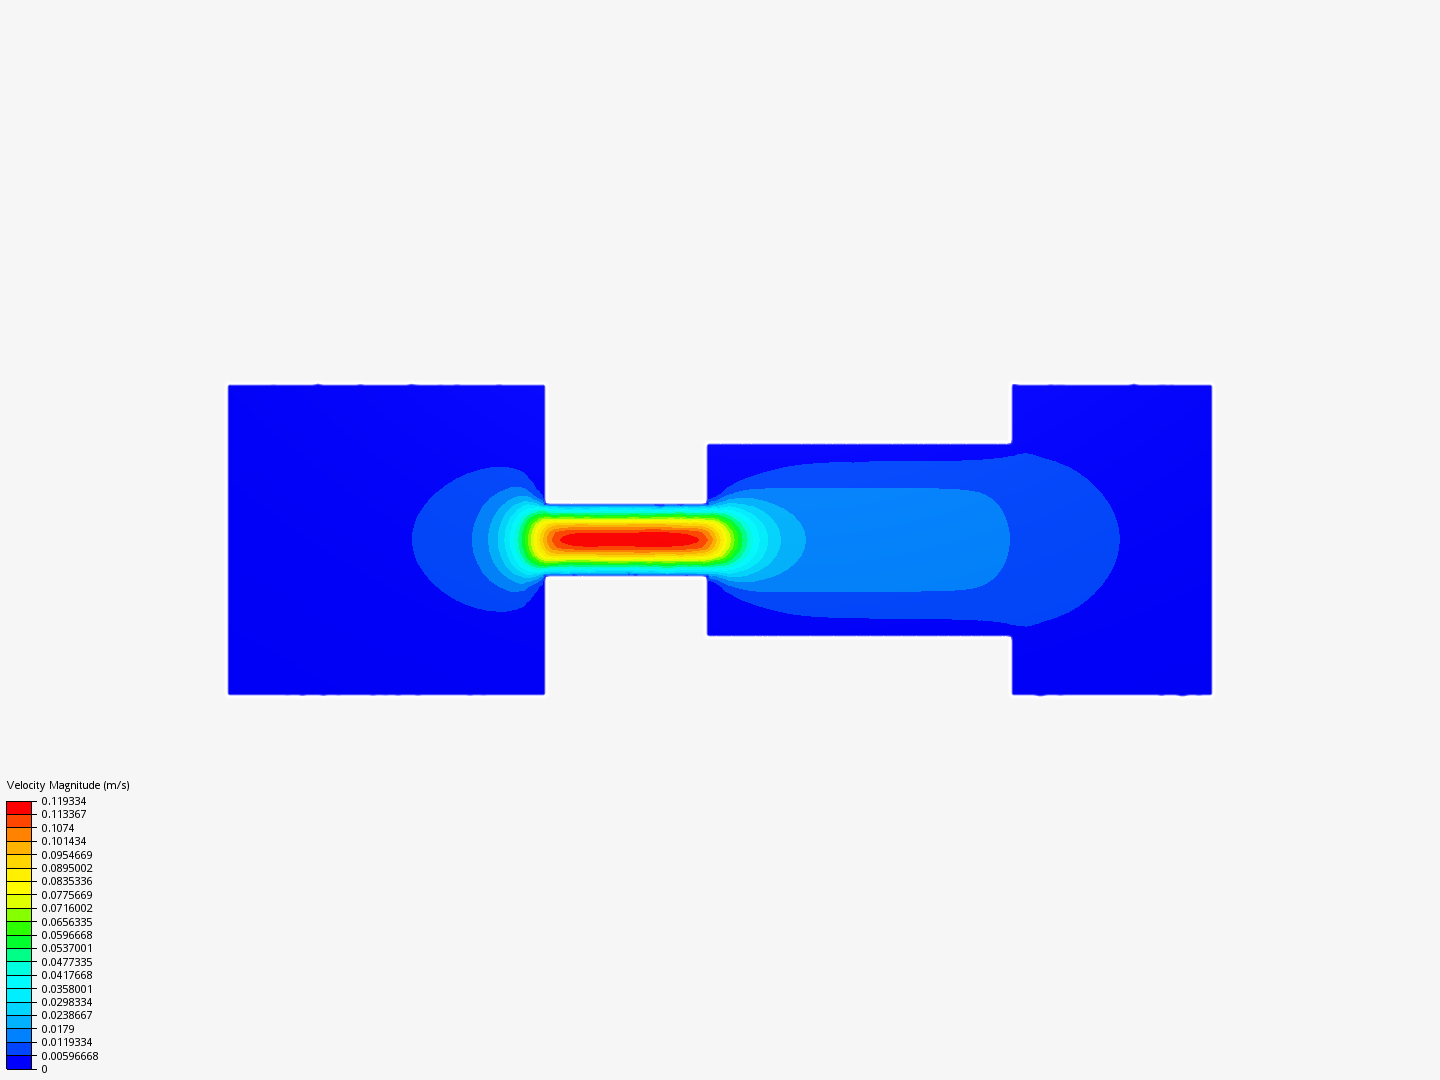 Flow of oil in Booster image